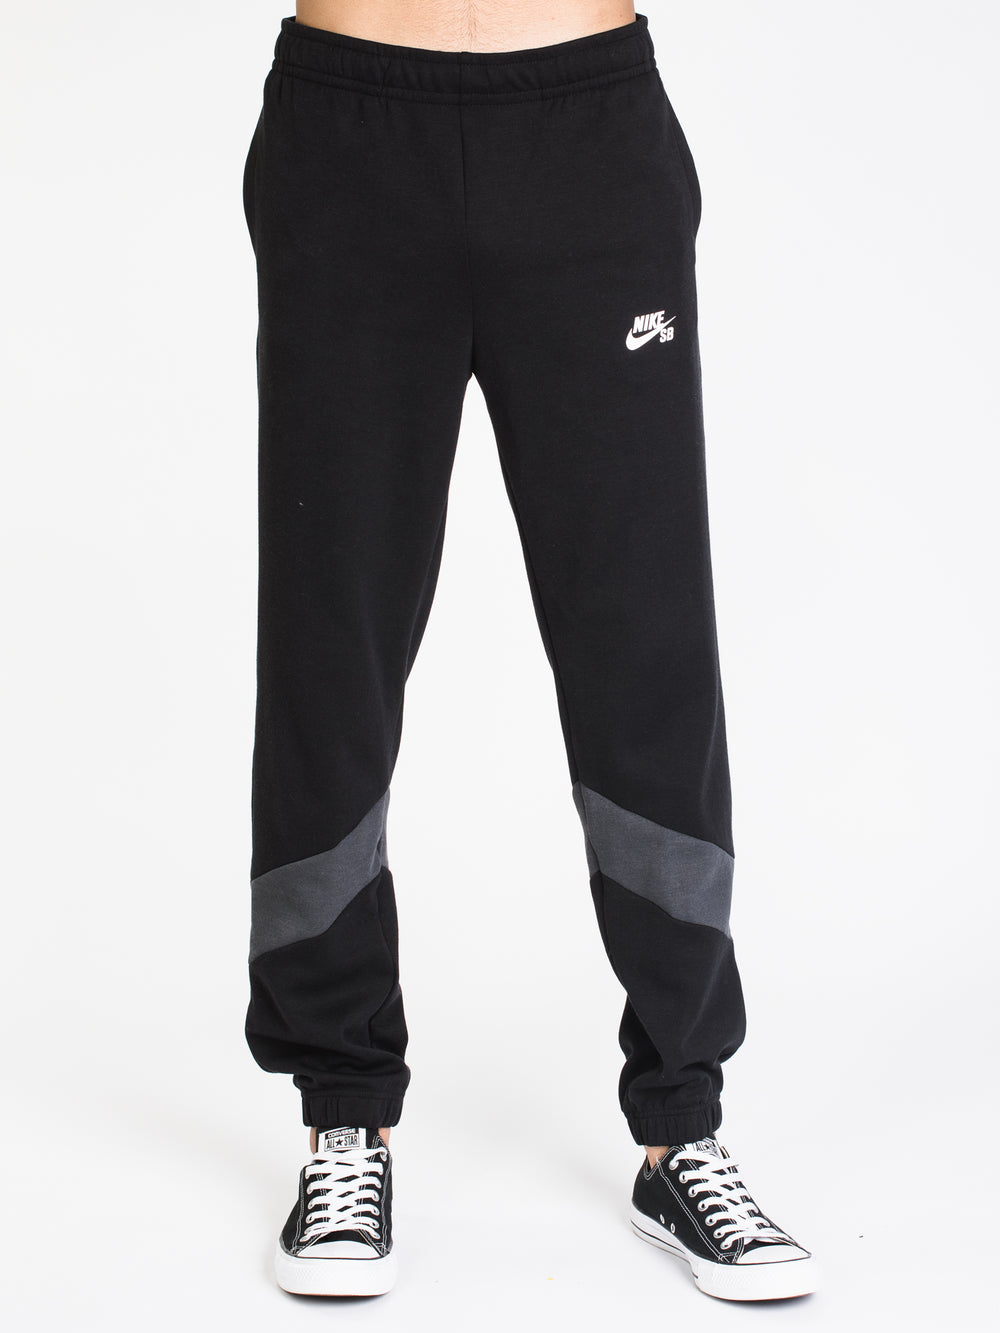 MENS SB DRY ICON TRACK PANT - BLK - CLEARANCE